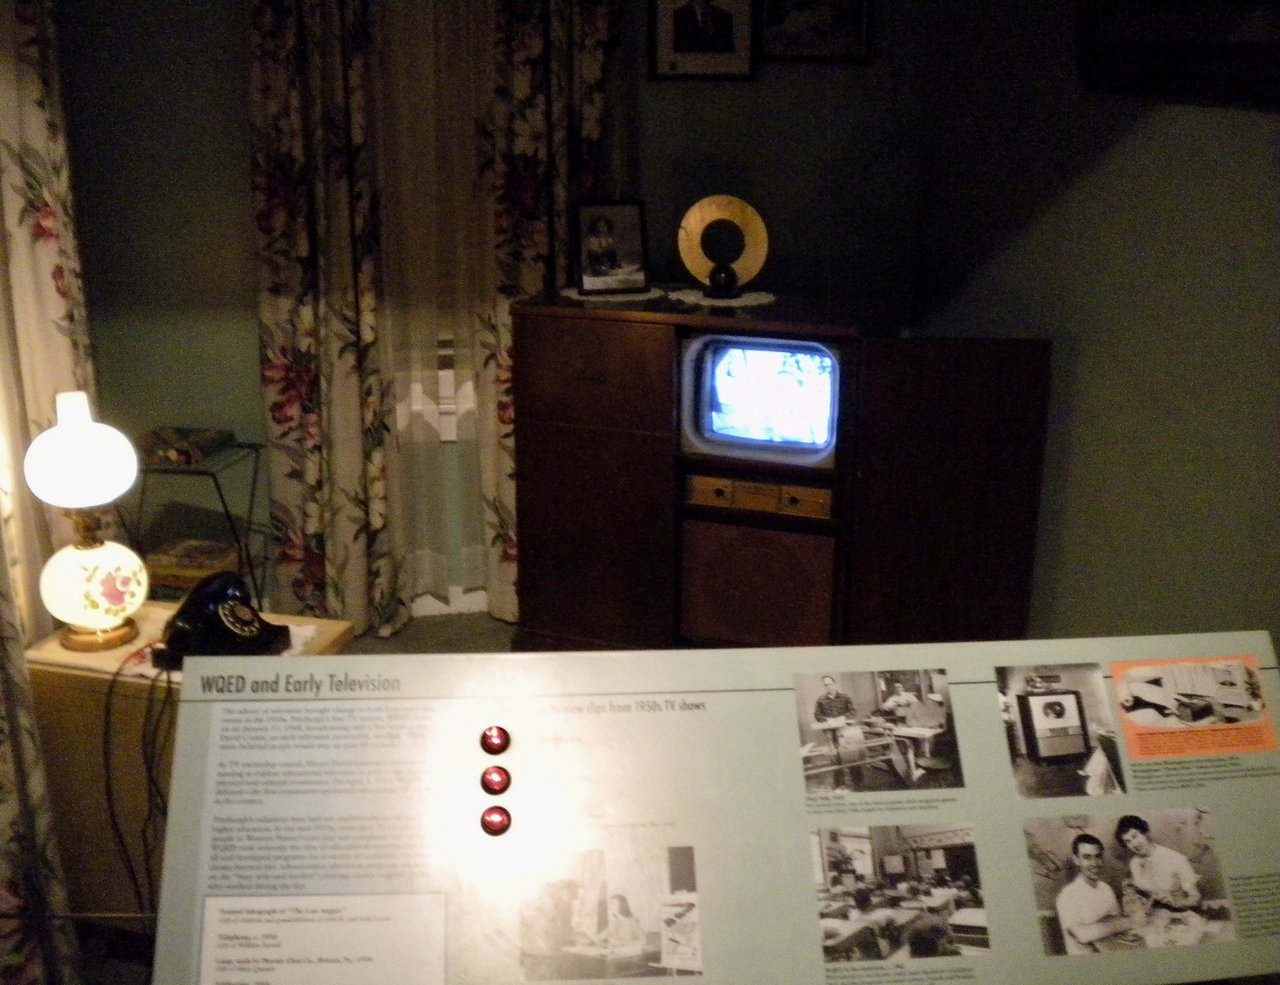 Heinz History Center - WQED and Early
Television